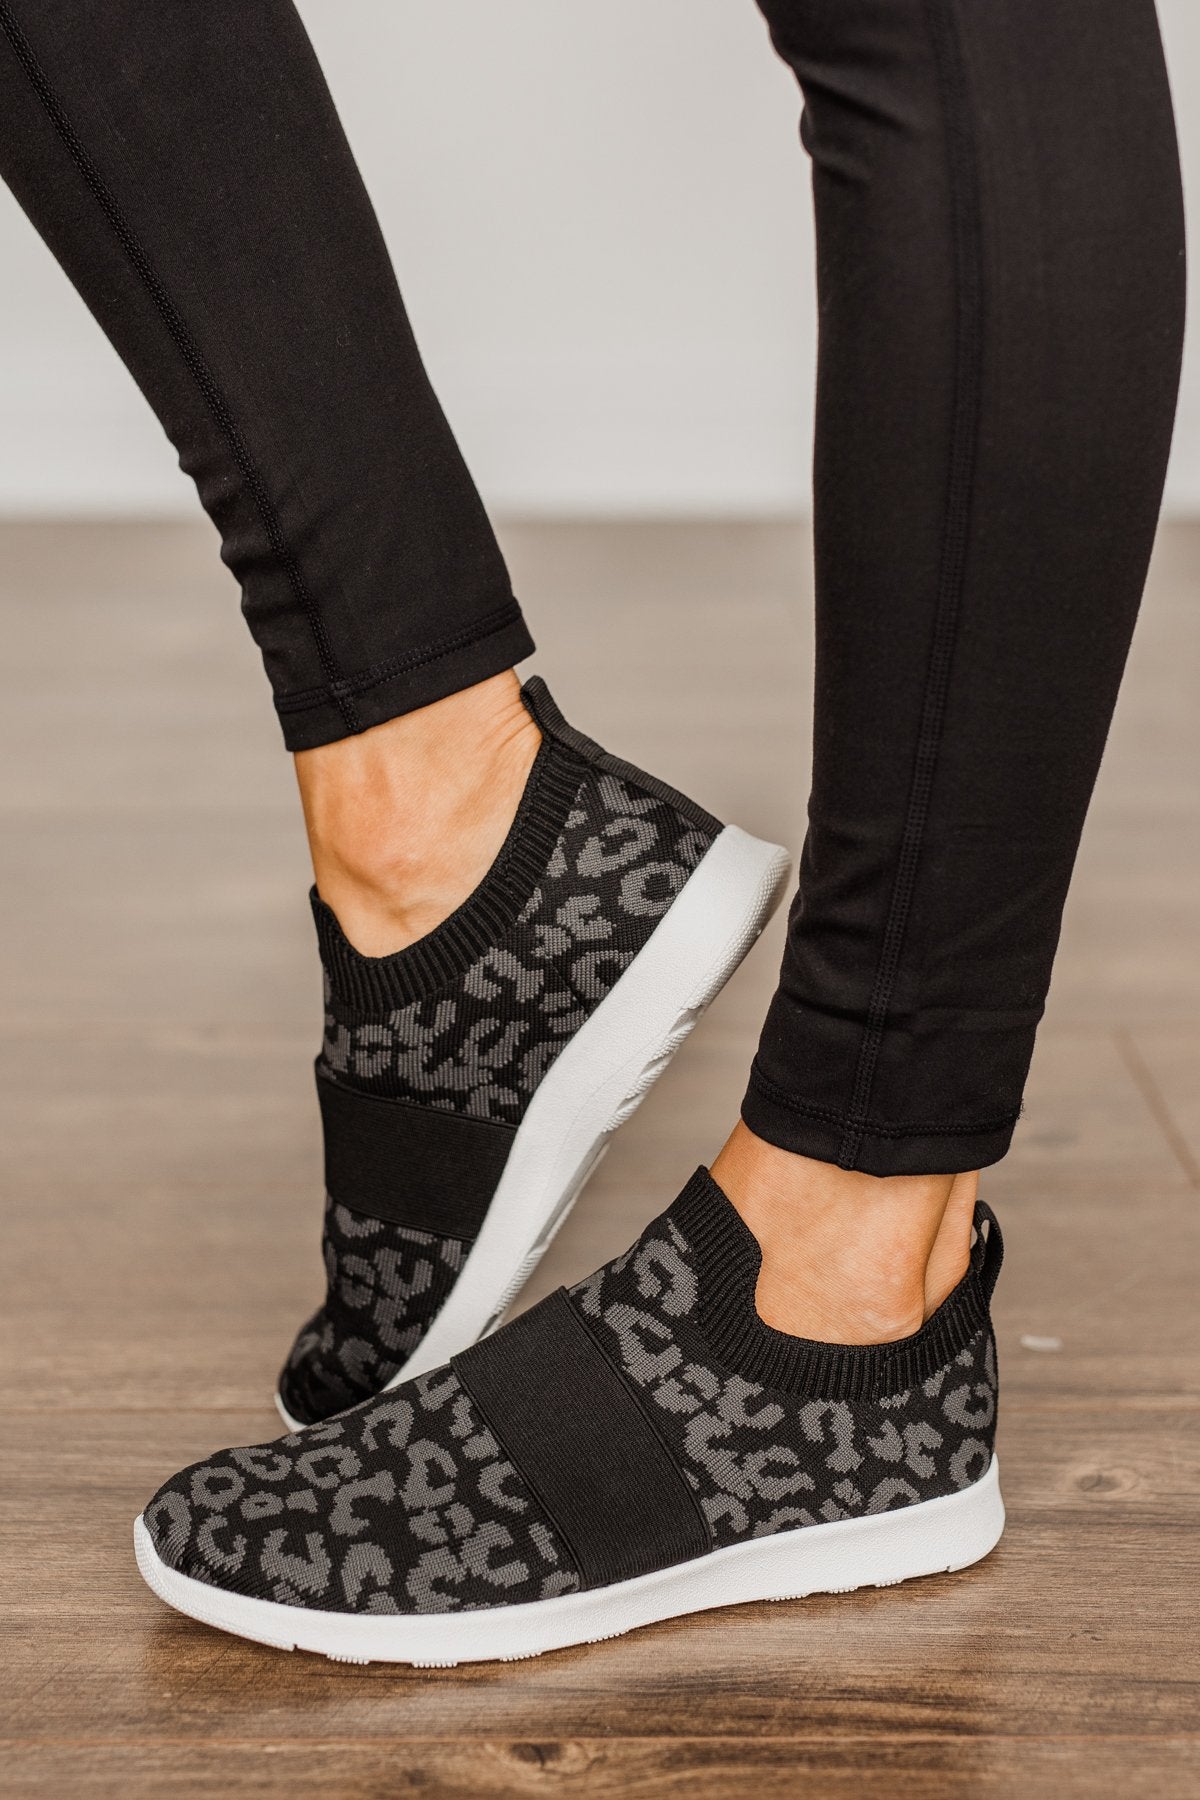 Not Rated Jia Sneakers- Black Leopard Print